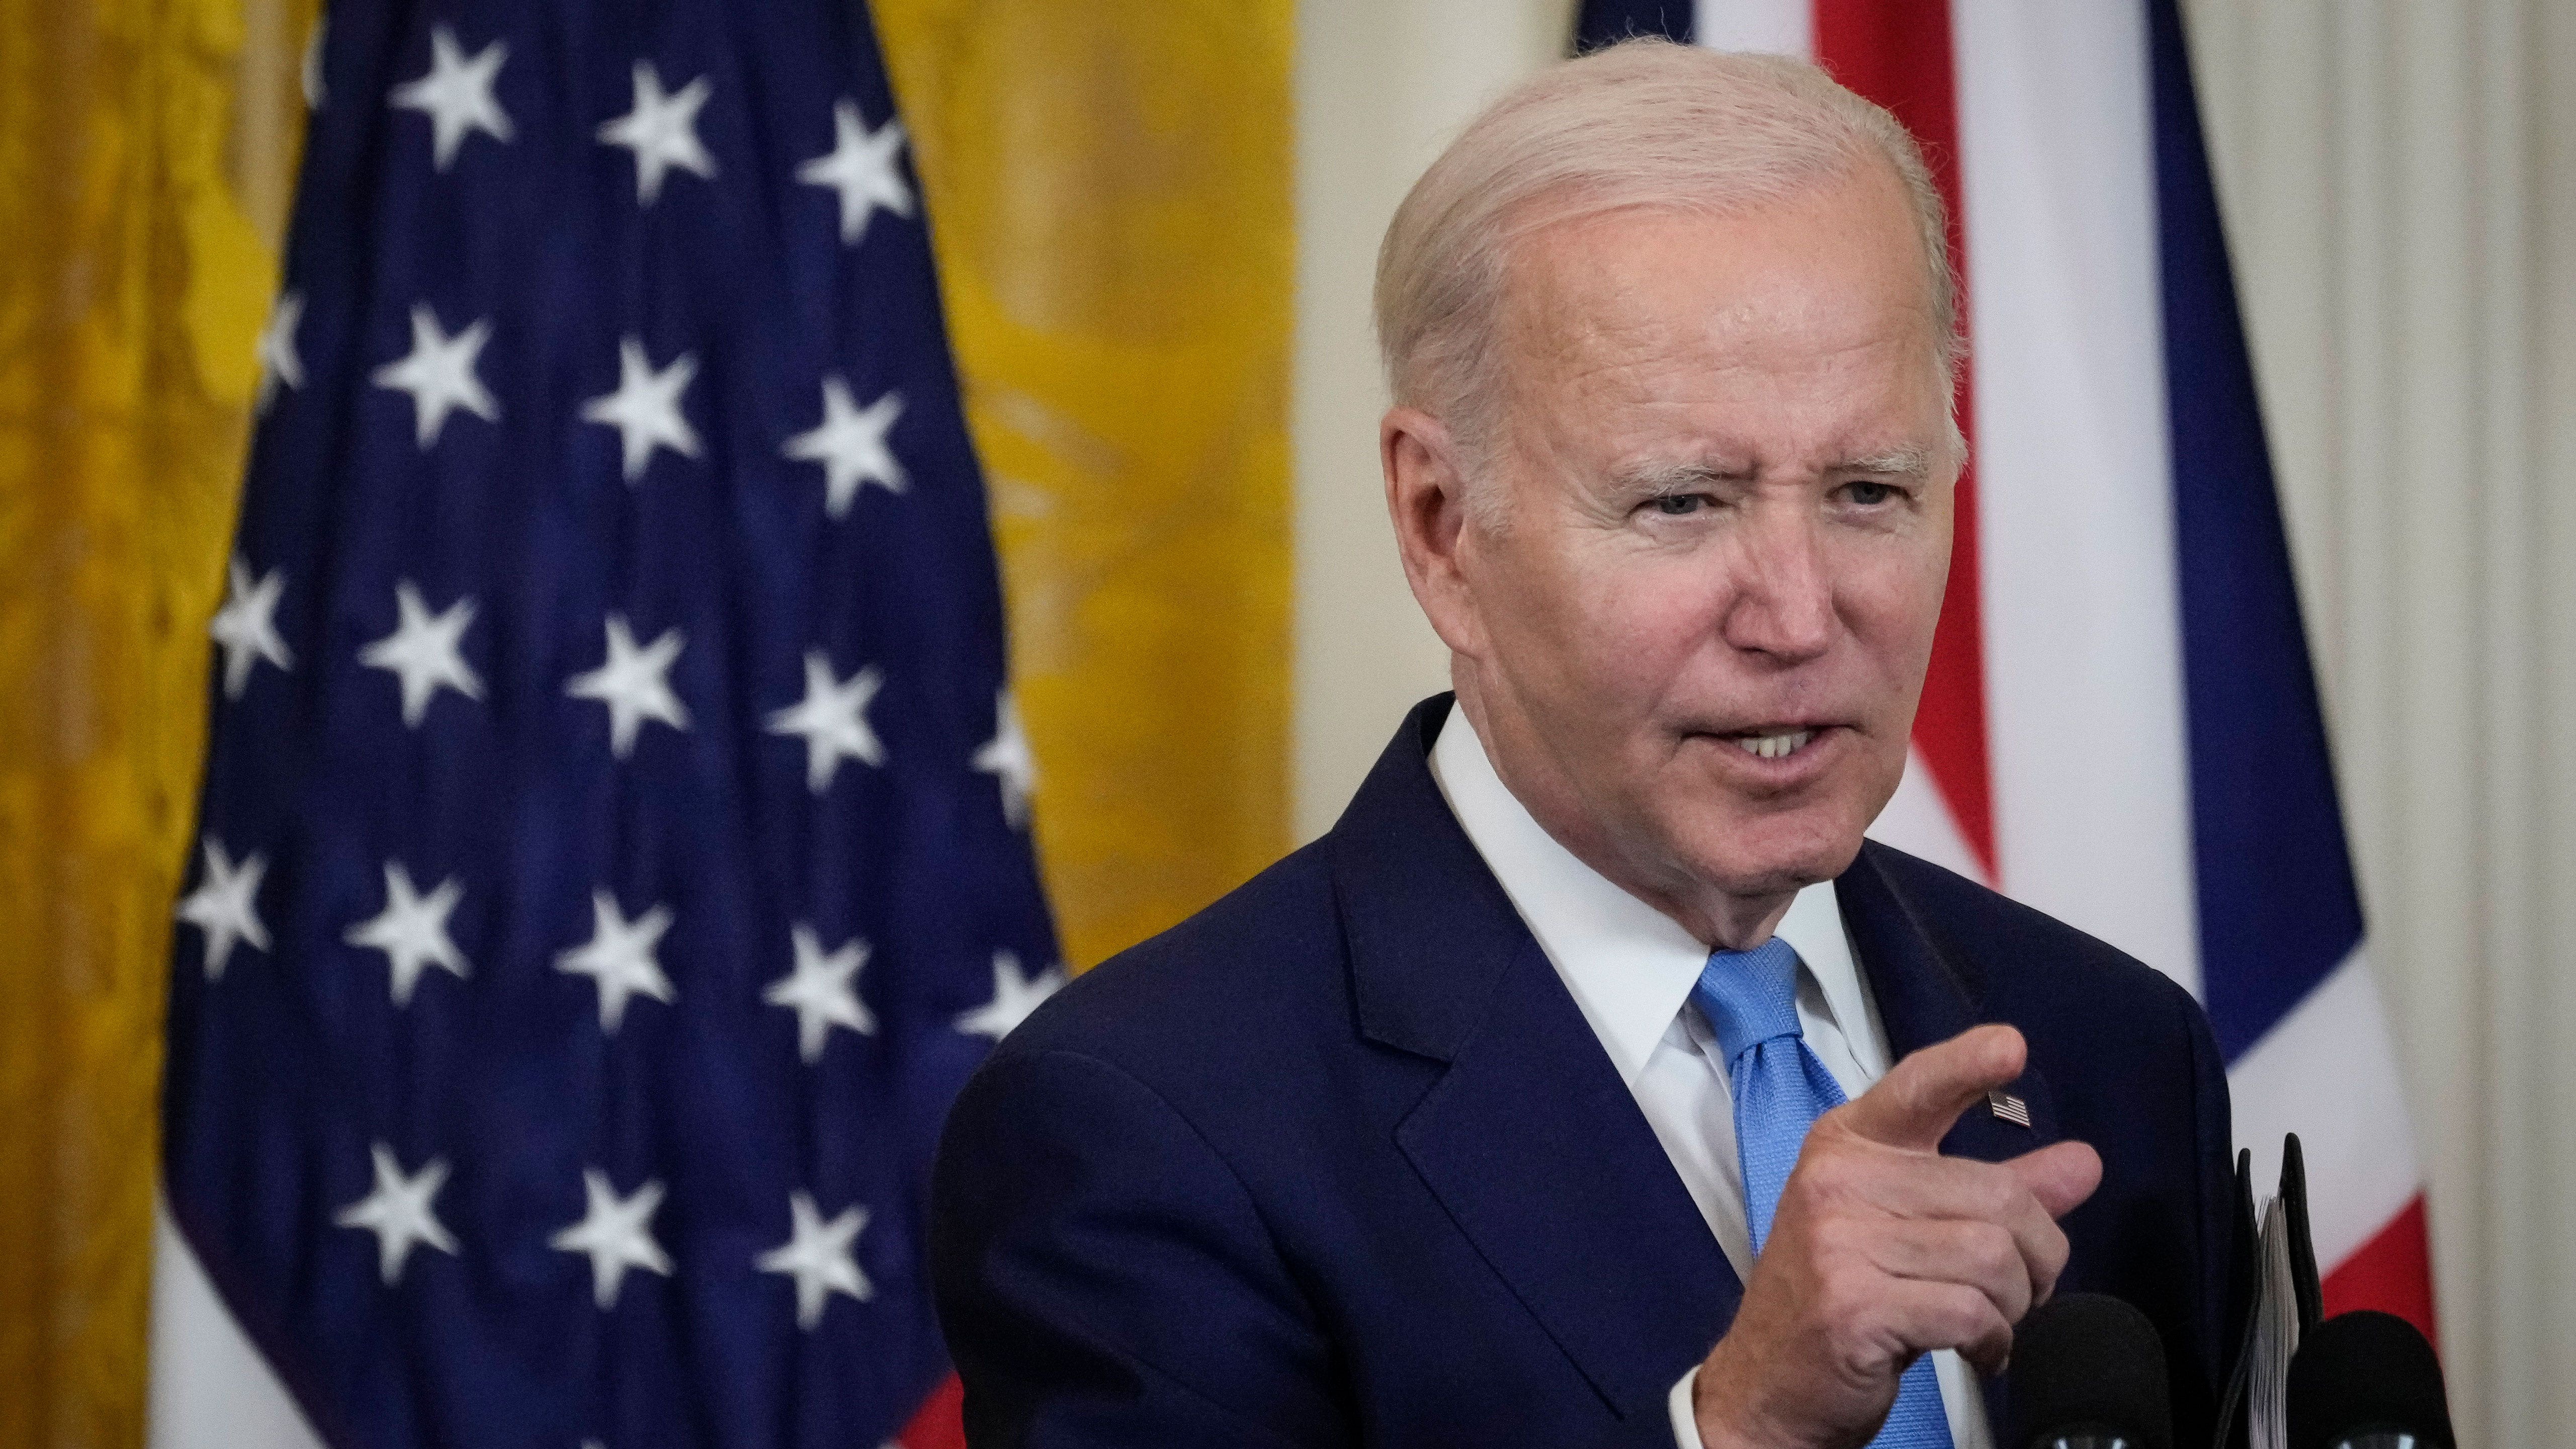 Biden to create new federal office for gun violence prevention: reports